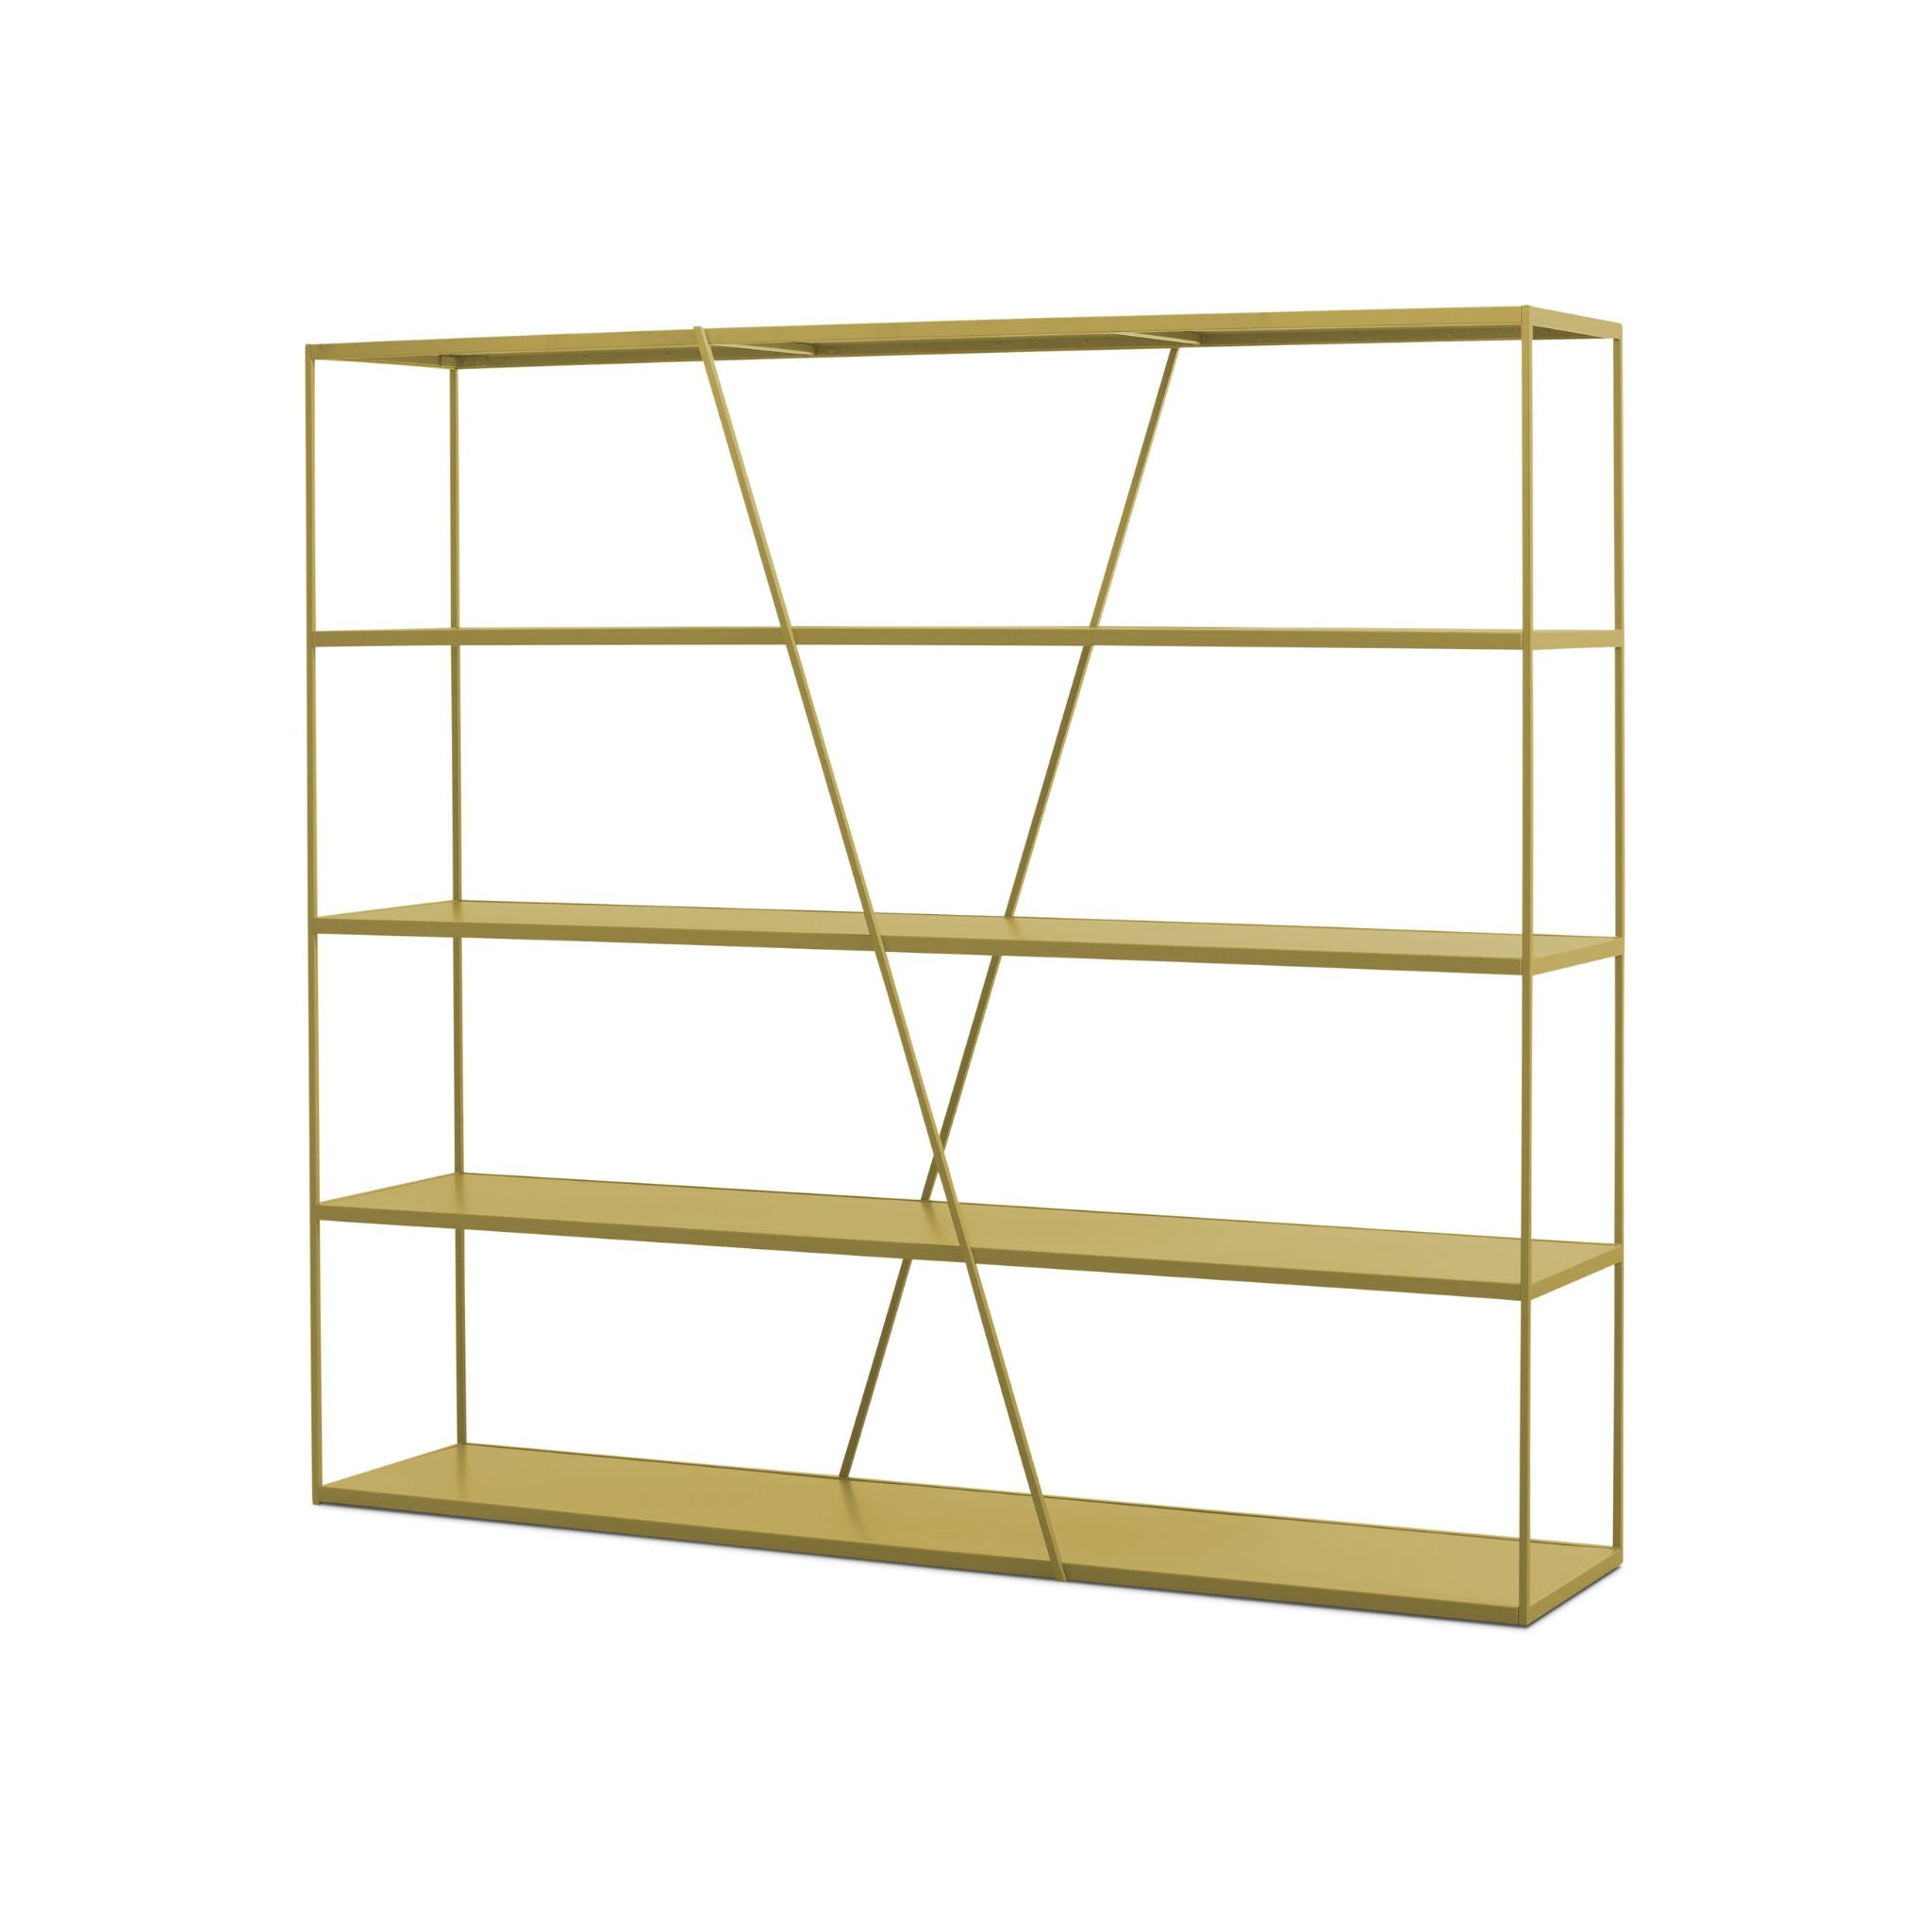 NeedWant Long and Tall Shelving